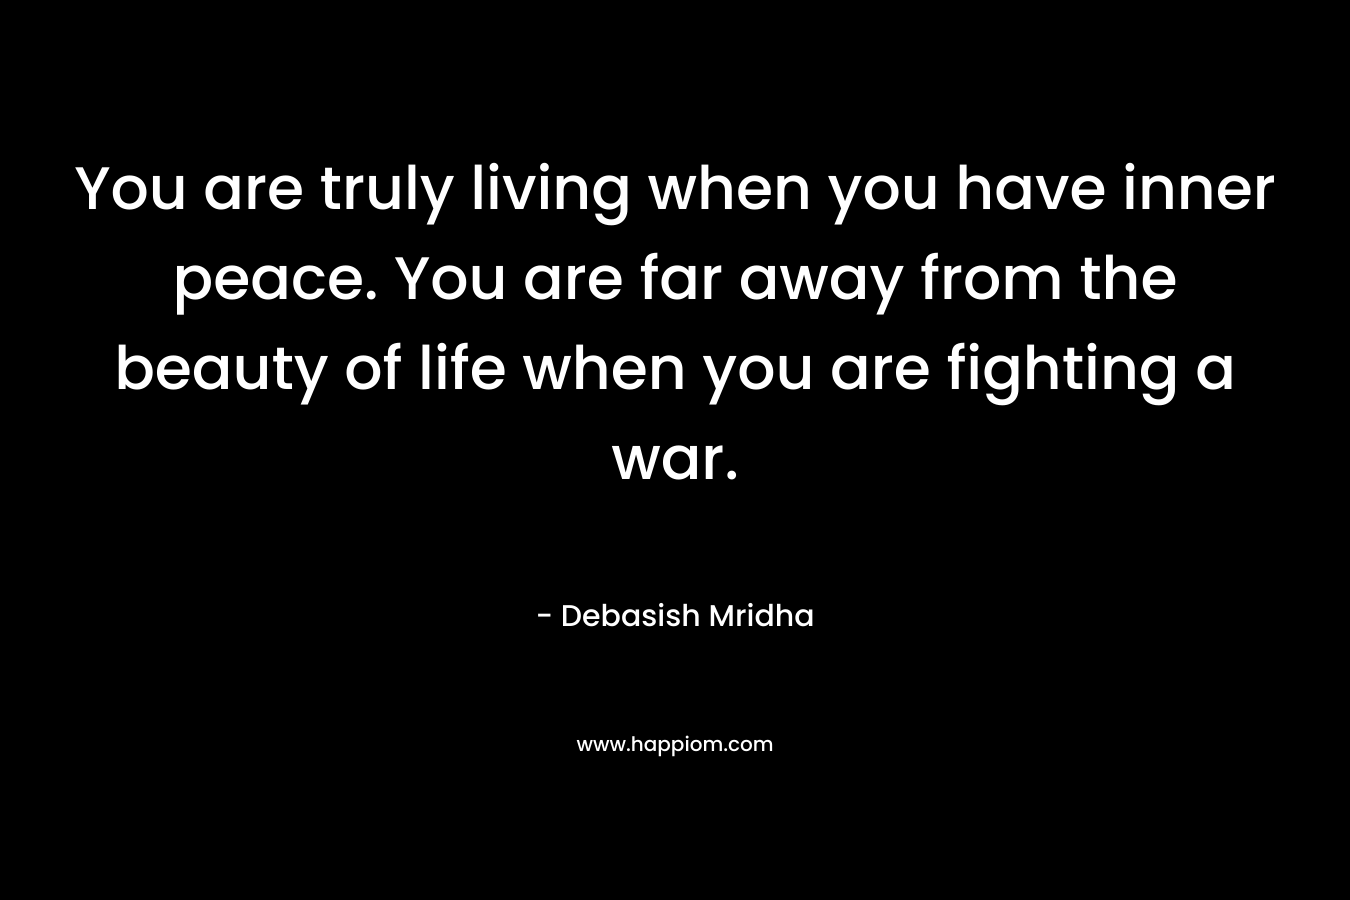 You are truly living when you have inner peace. You are far away from the beauty of life when you are fighting a war.